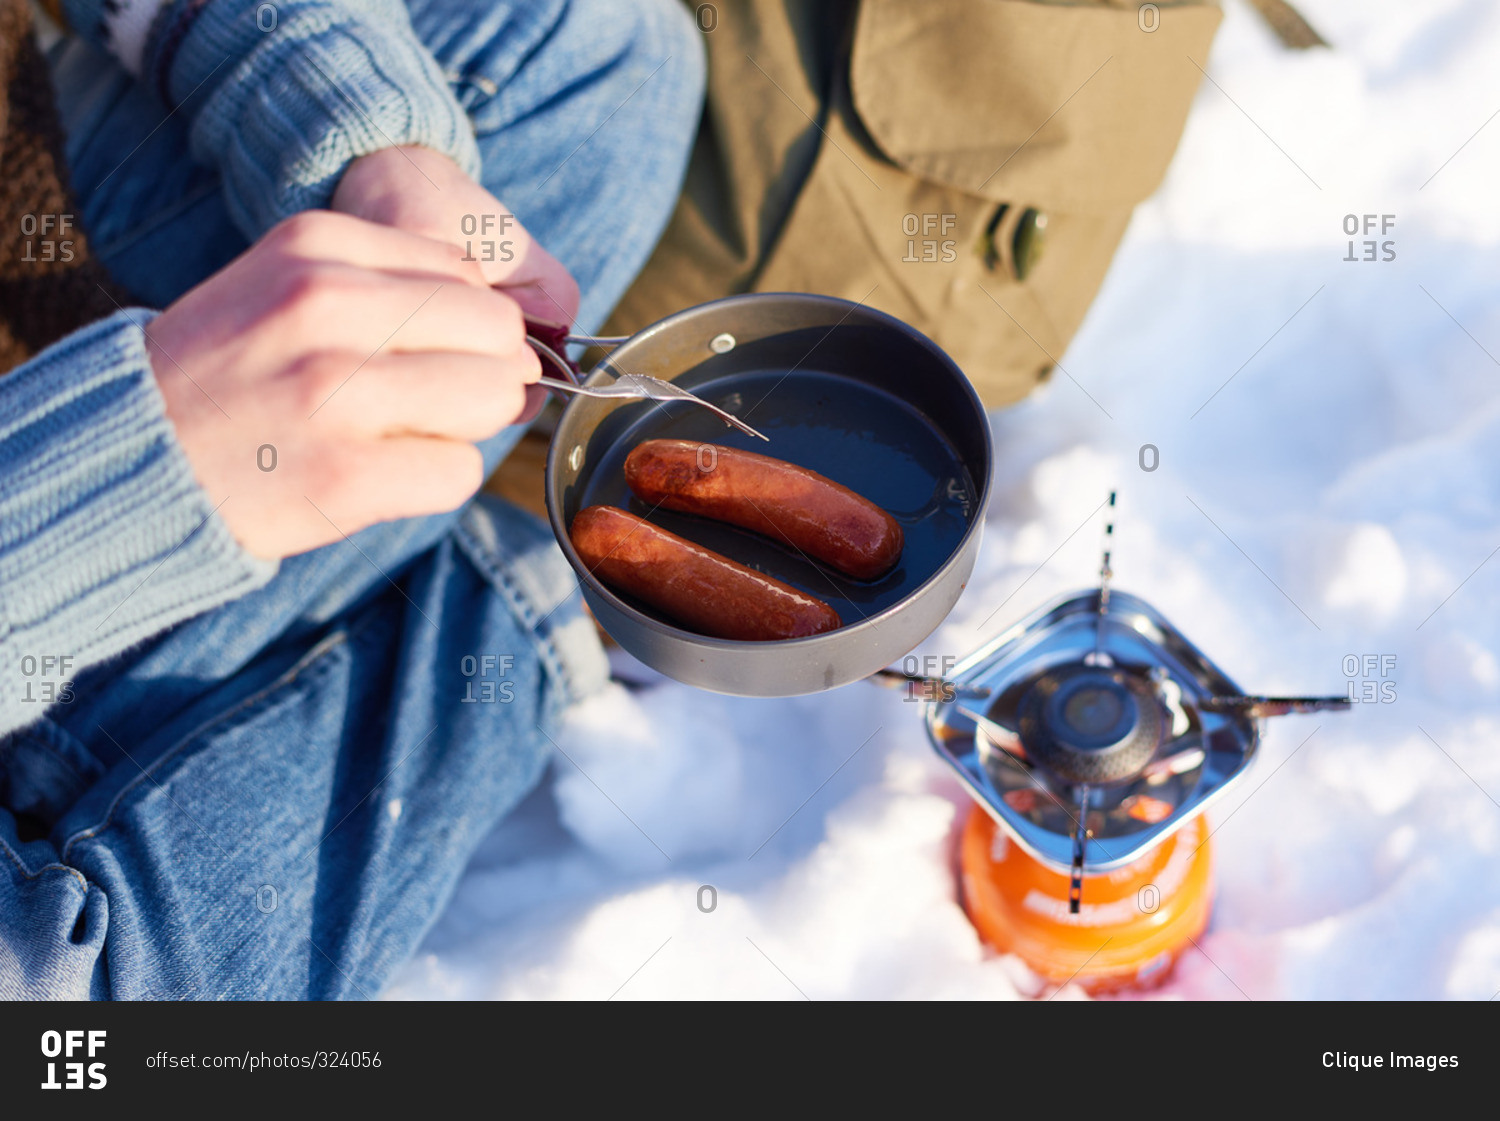 Man cooking sausages over a campstove in the snow